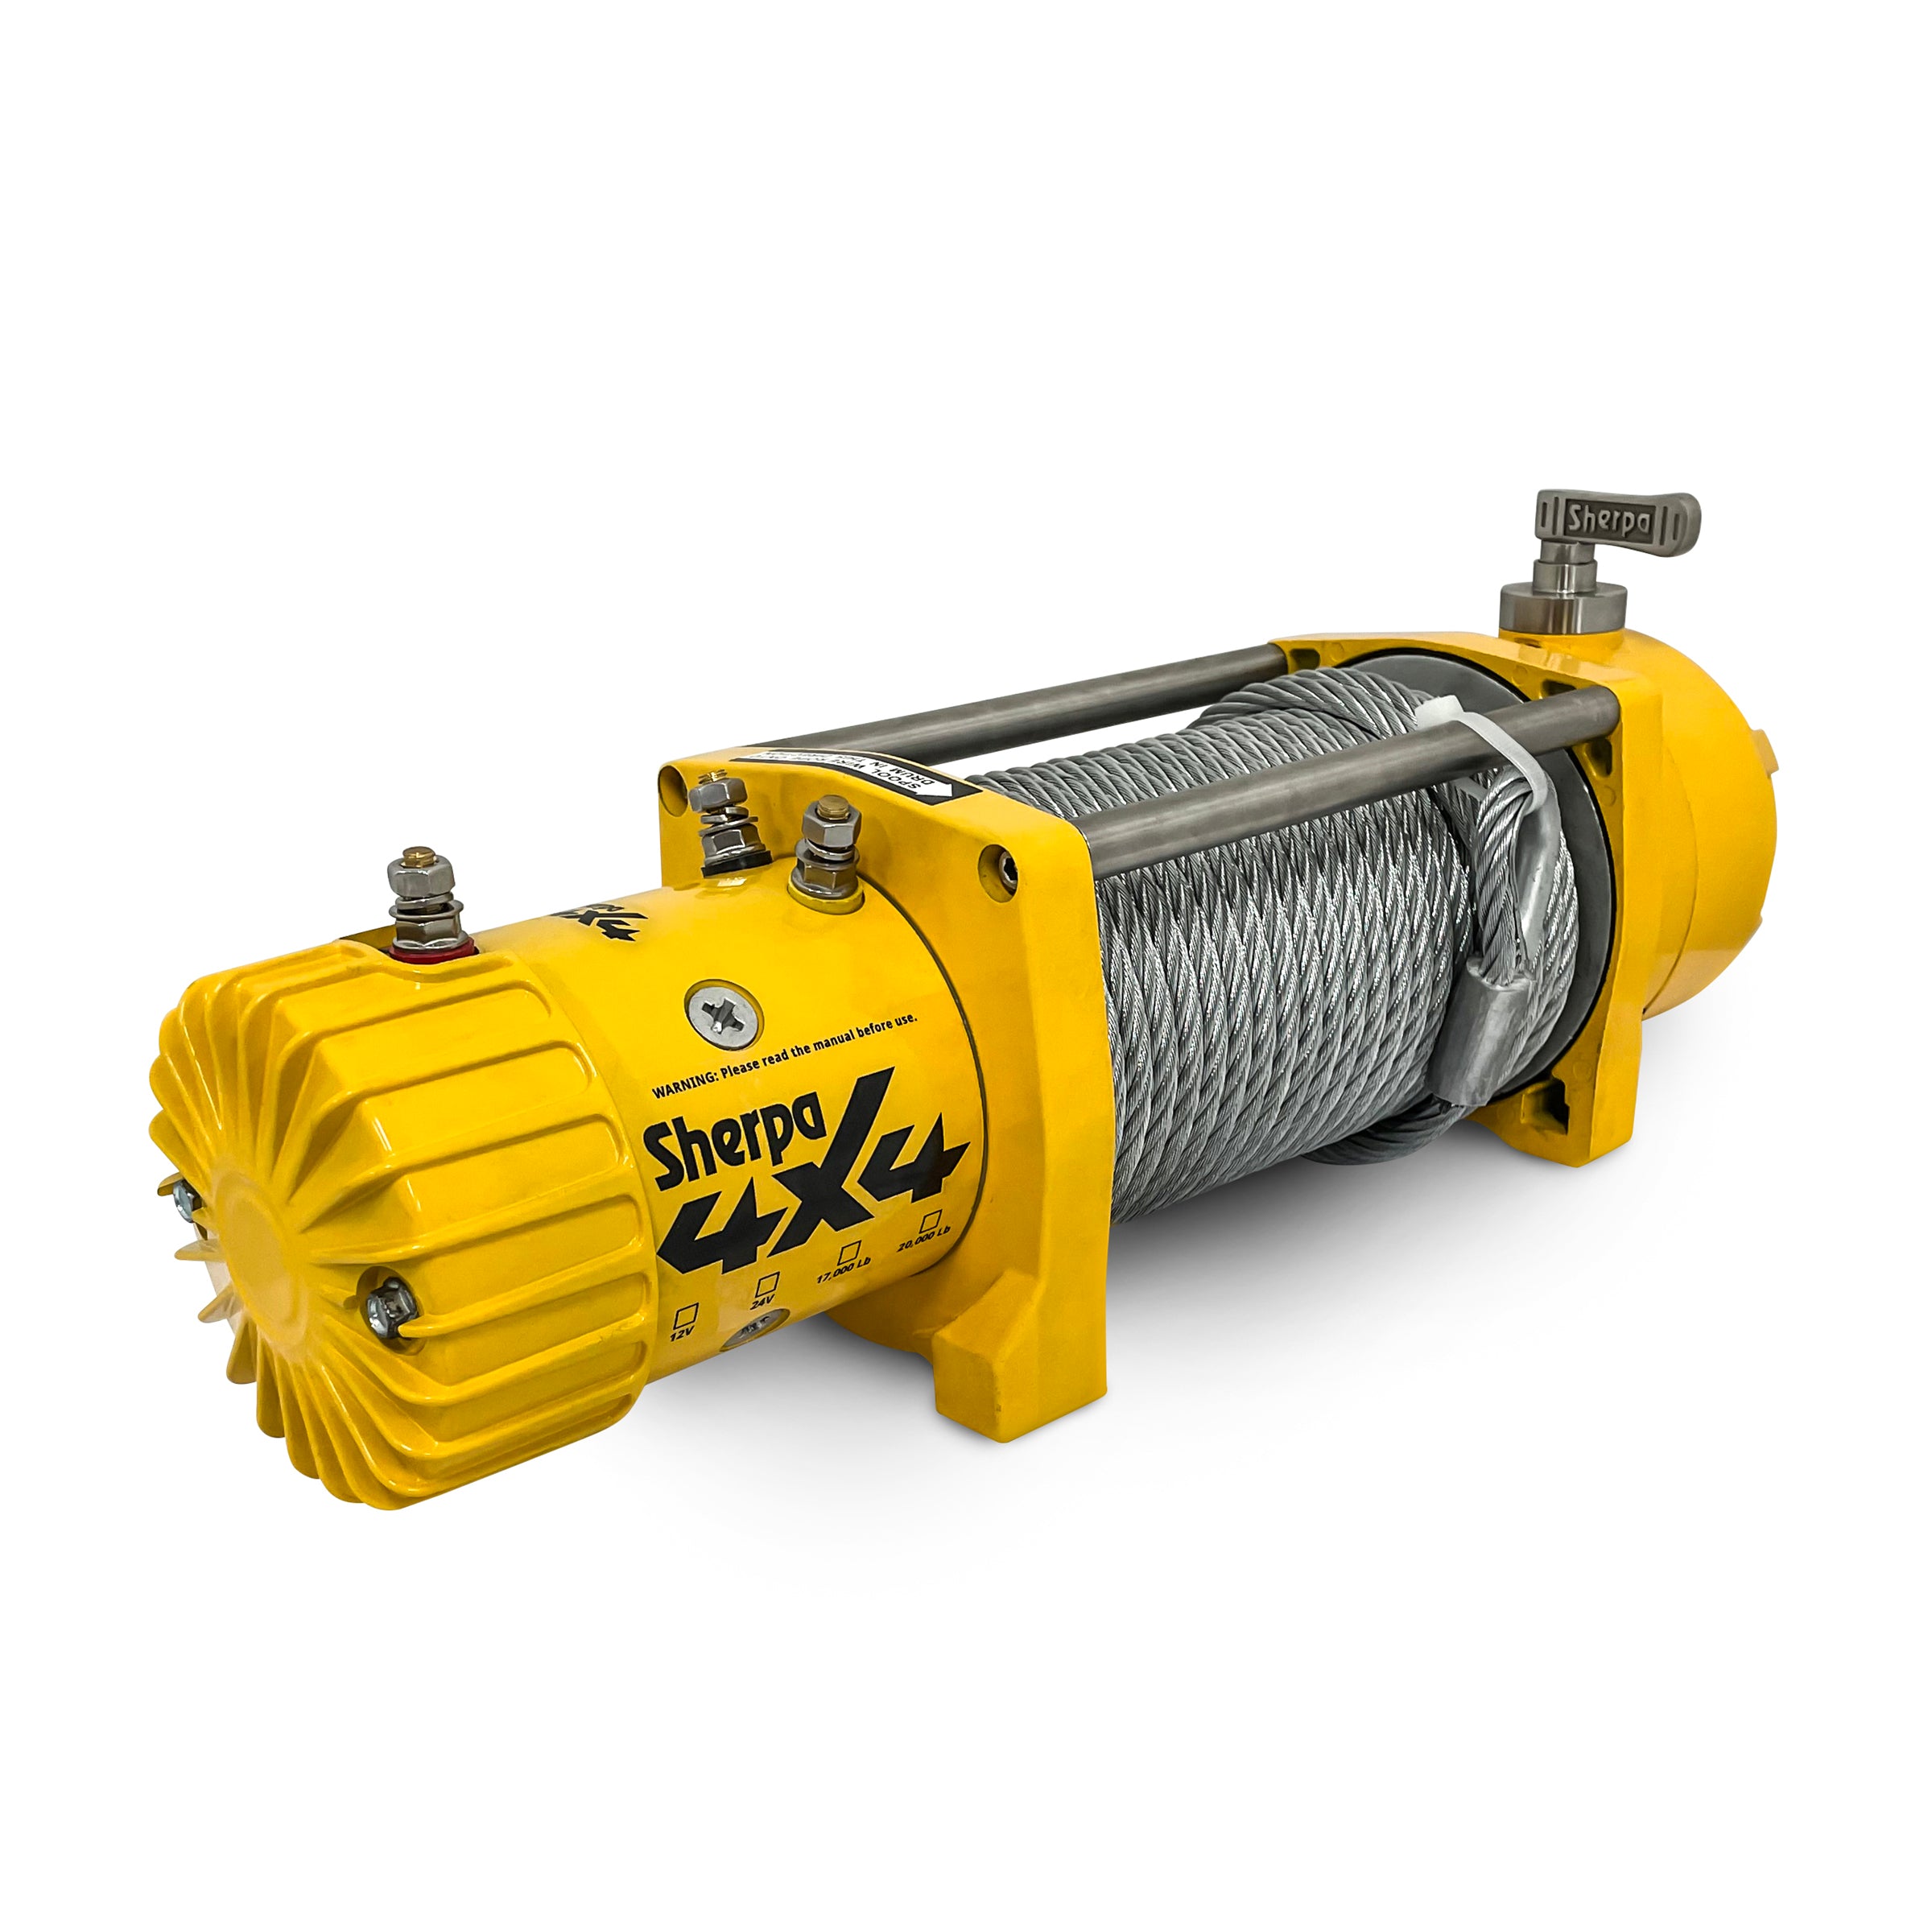 Sherpa Steed 28m steel cable winches